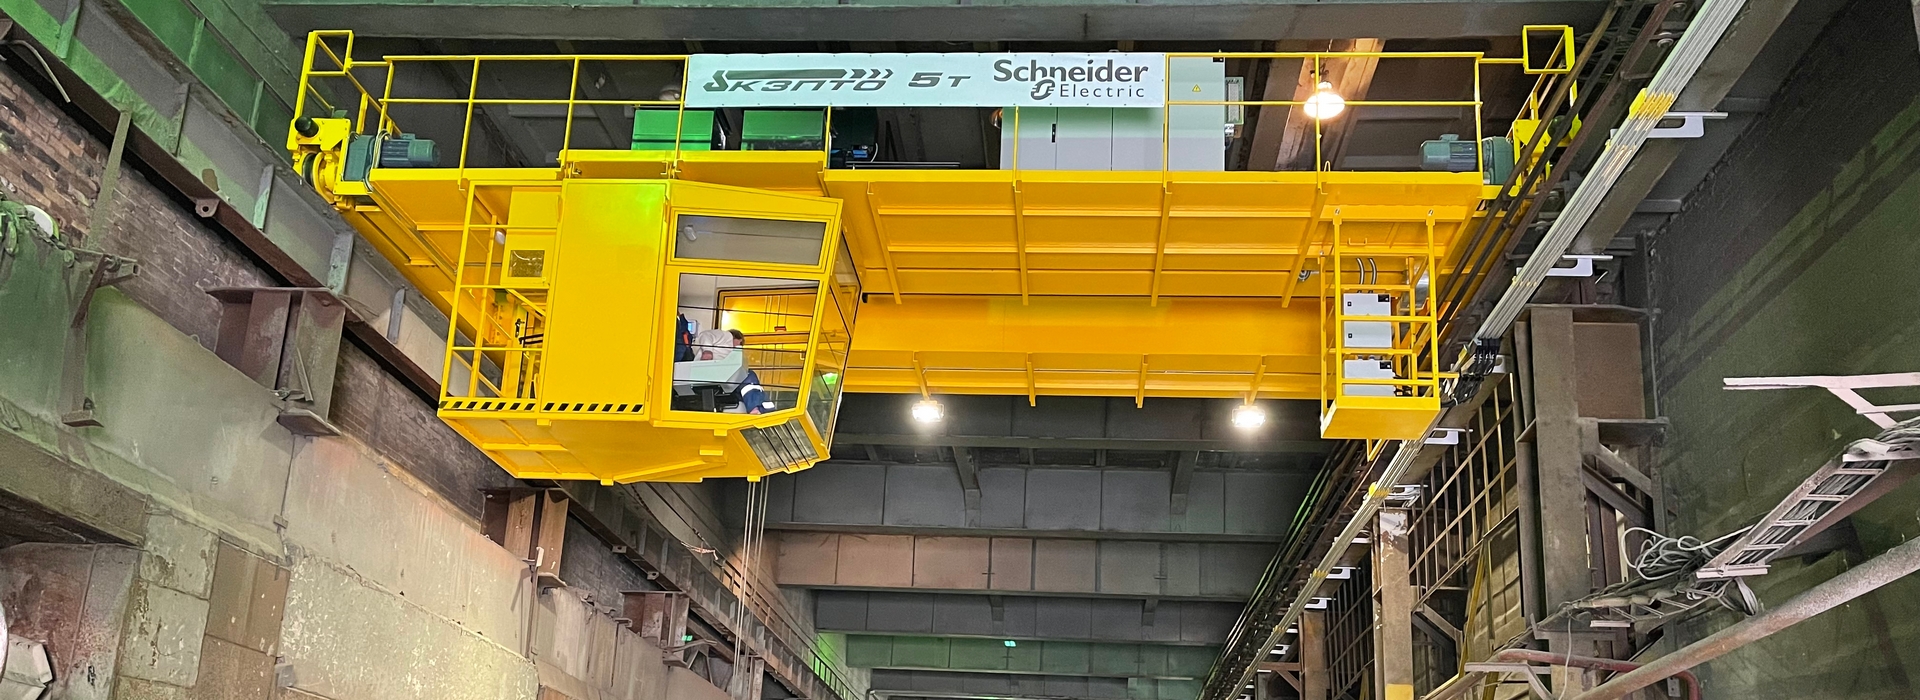 Schneider Electric Ukraine Has Completed a Crane Automation Project at an Incinerator in Kyiv